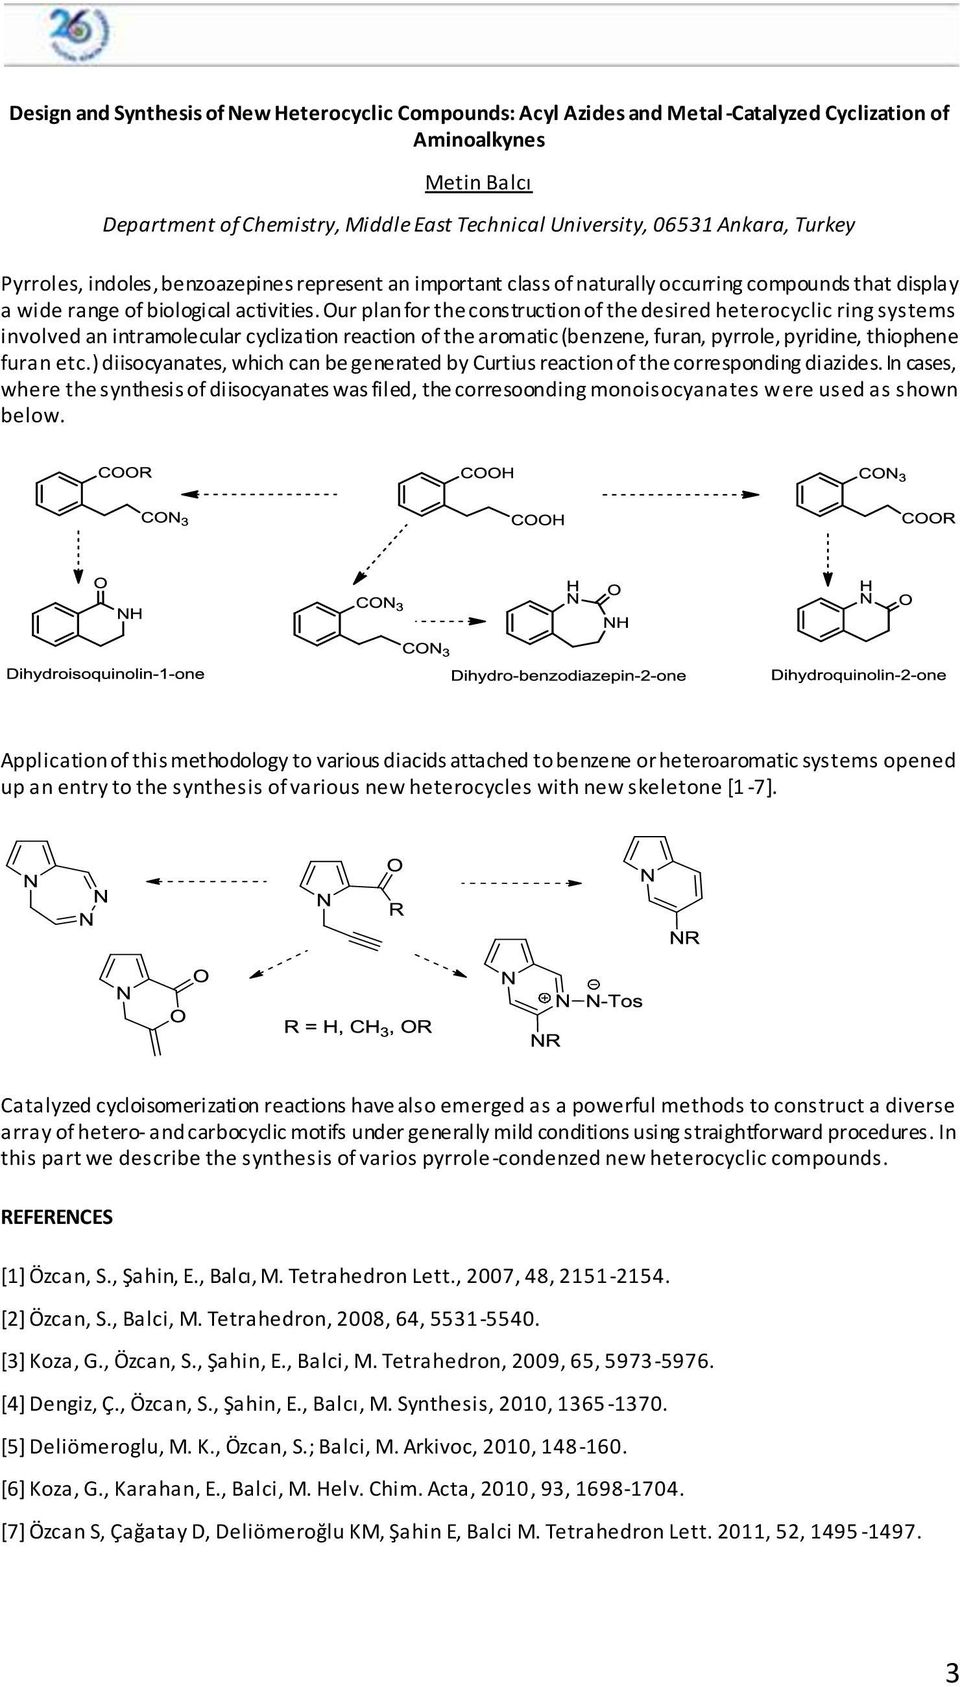 Our plan for the construction of the desired heterocyclic ring systems involved an intramolecular cyclization reaction of the aromatic (benzene, furan, pyrrole, pyridine, thiophene furan etc.